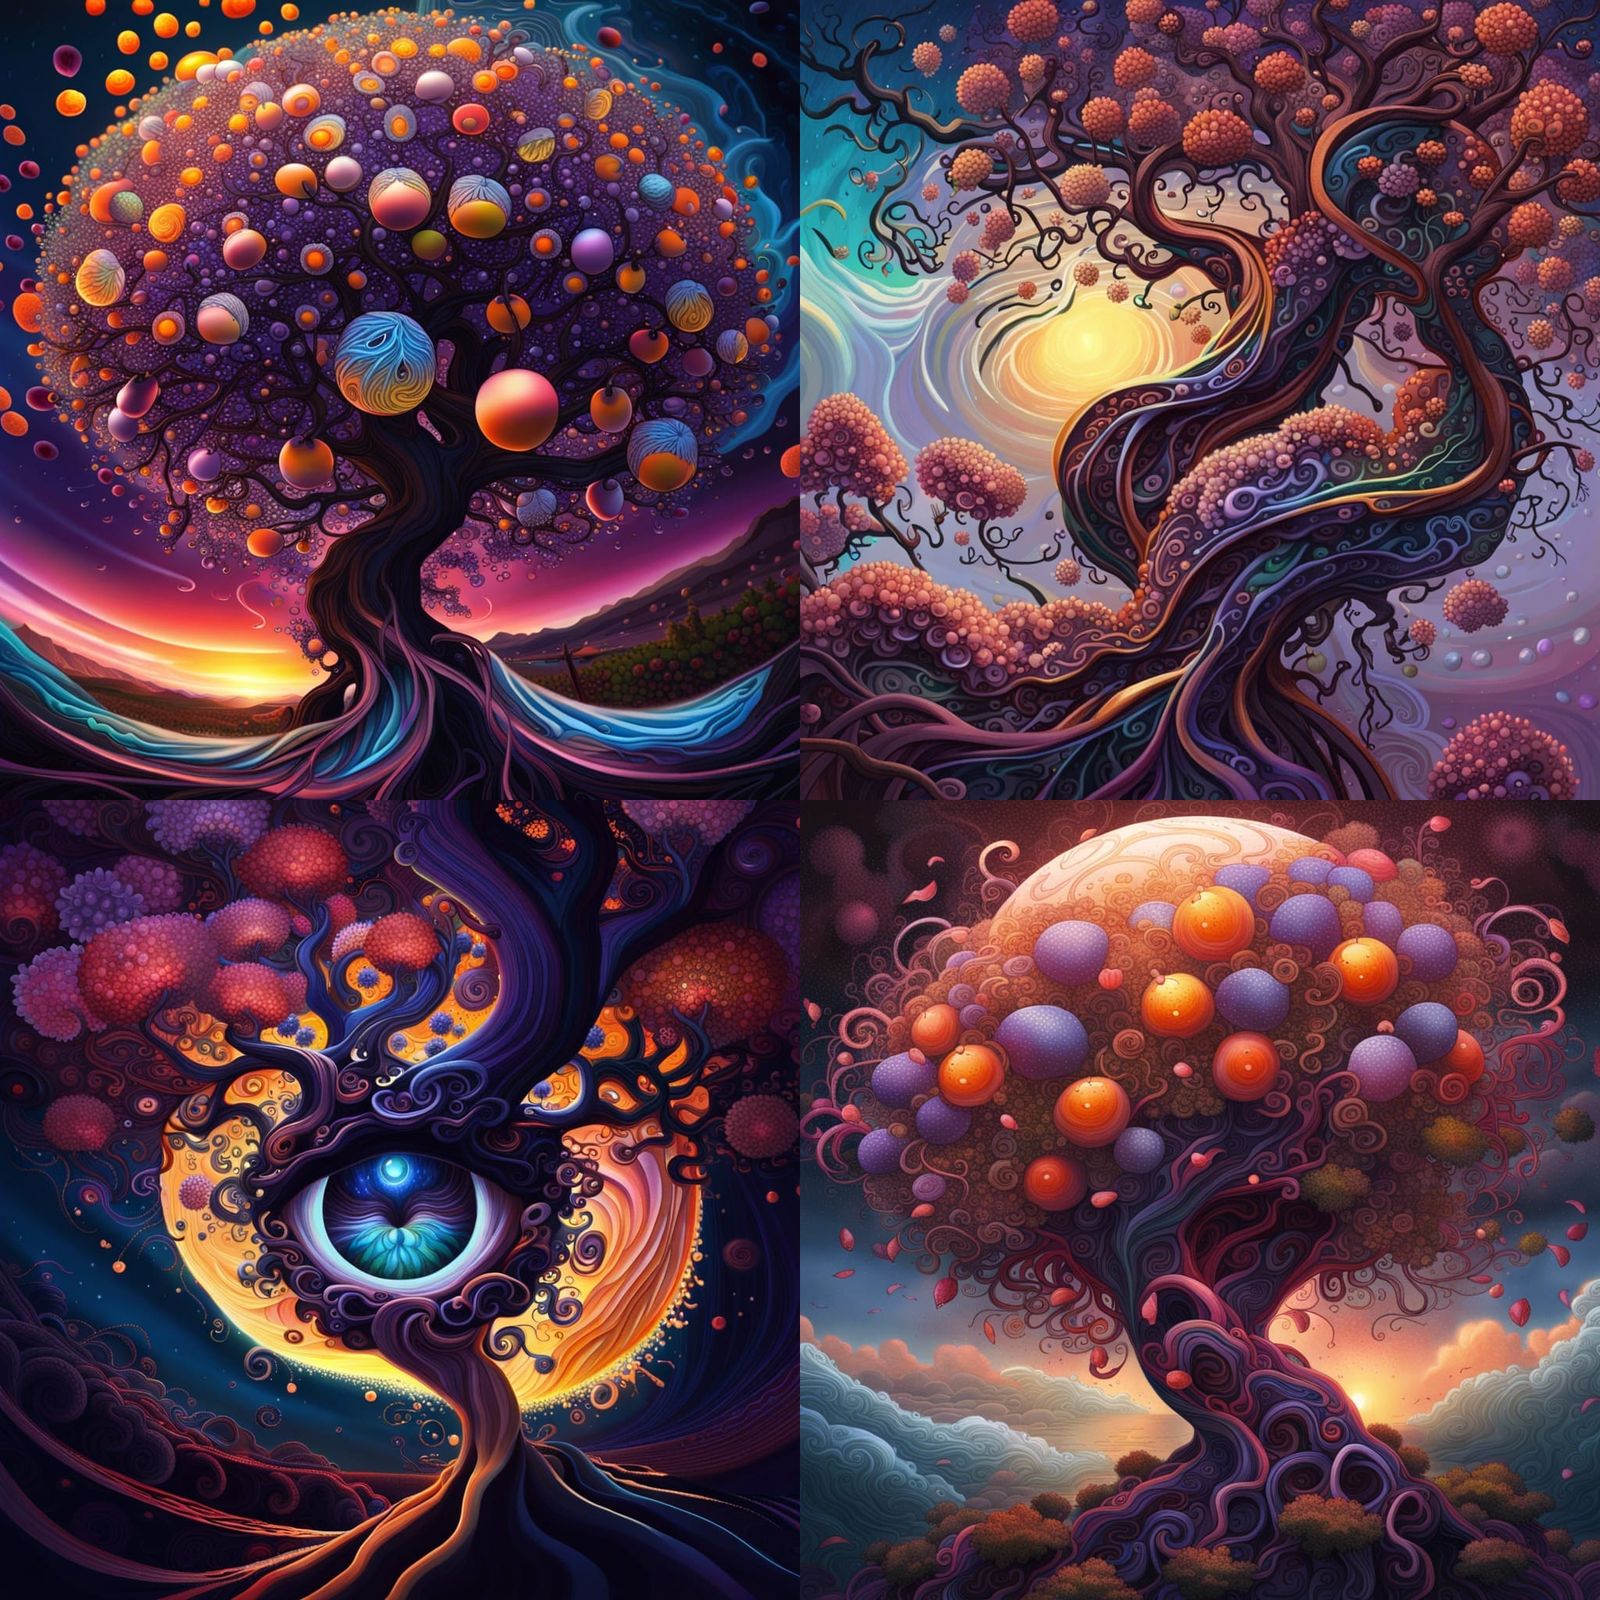 AI Love Dream: Human form, radiant ultra complex spherical plums eyes,  rain, storm, waves, complex blossom fruit tree with extremely twisty,  knotted trunk, - AI Generated Artwork - NightCafe Creator